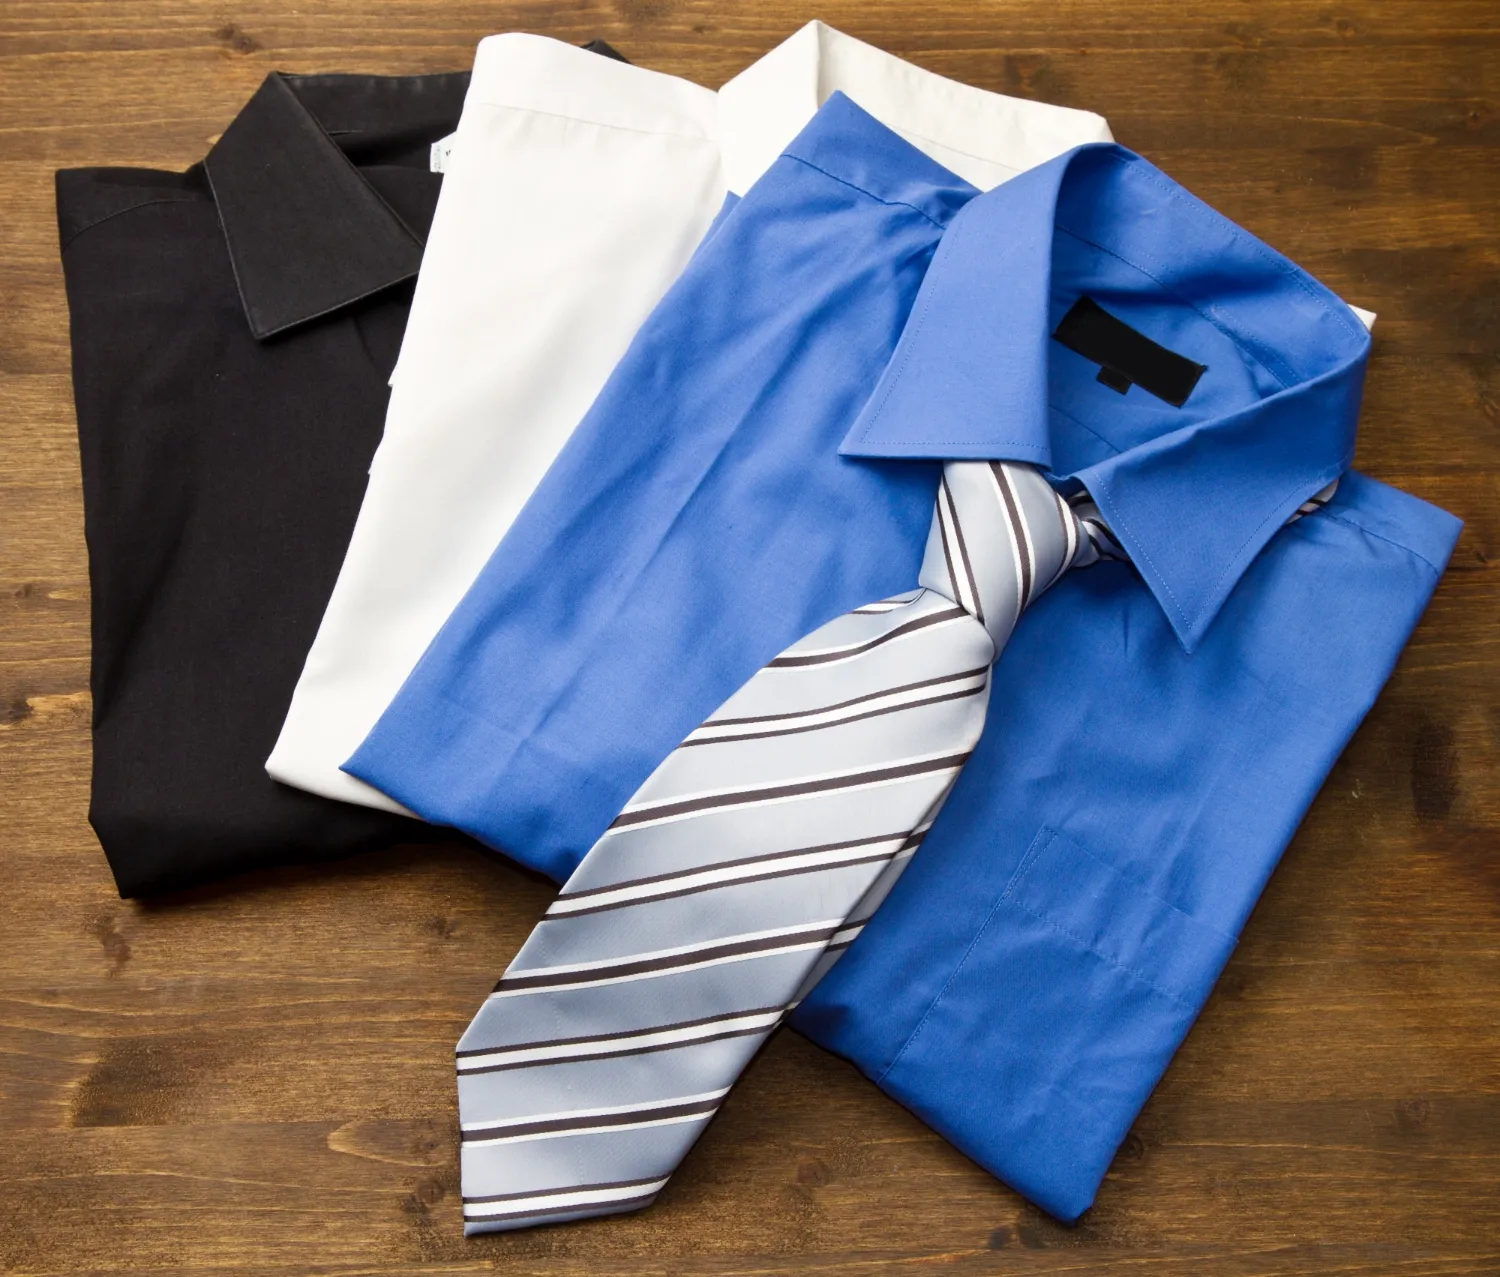 Close upfield with stacked shirts with tie